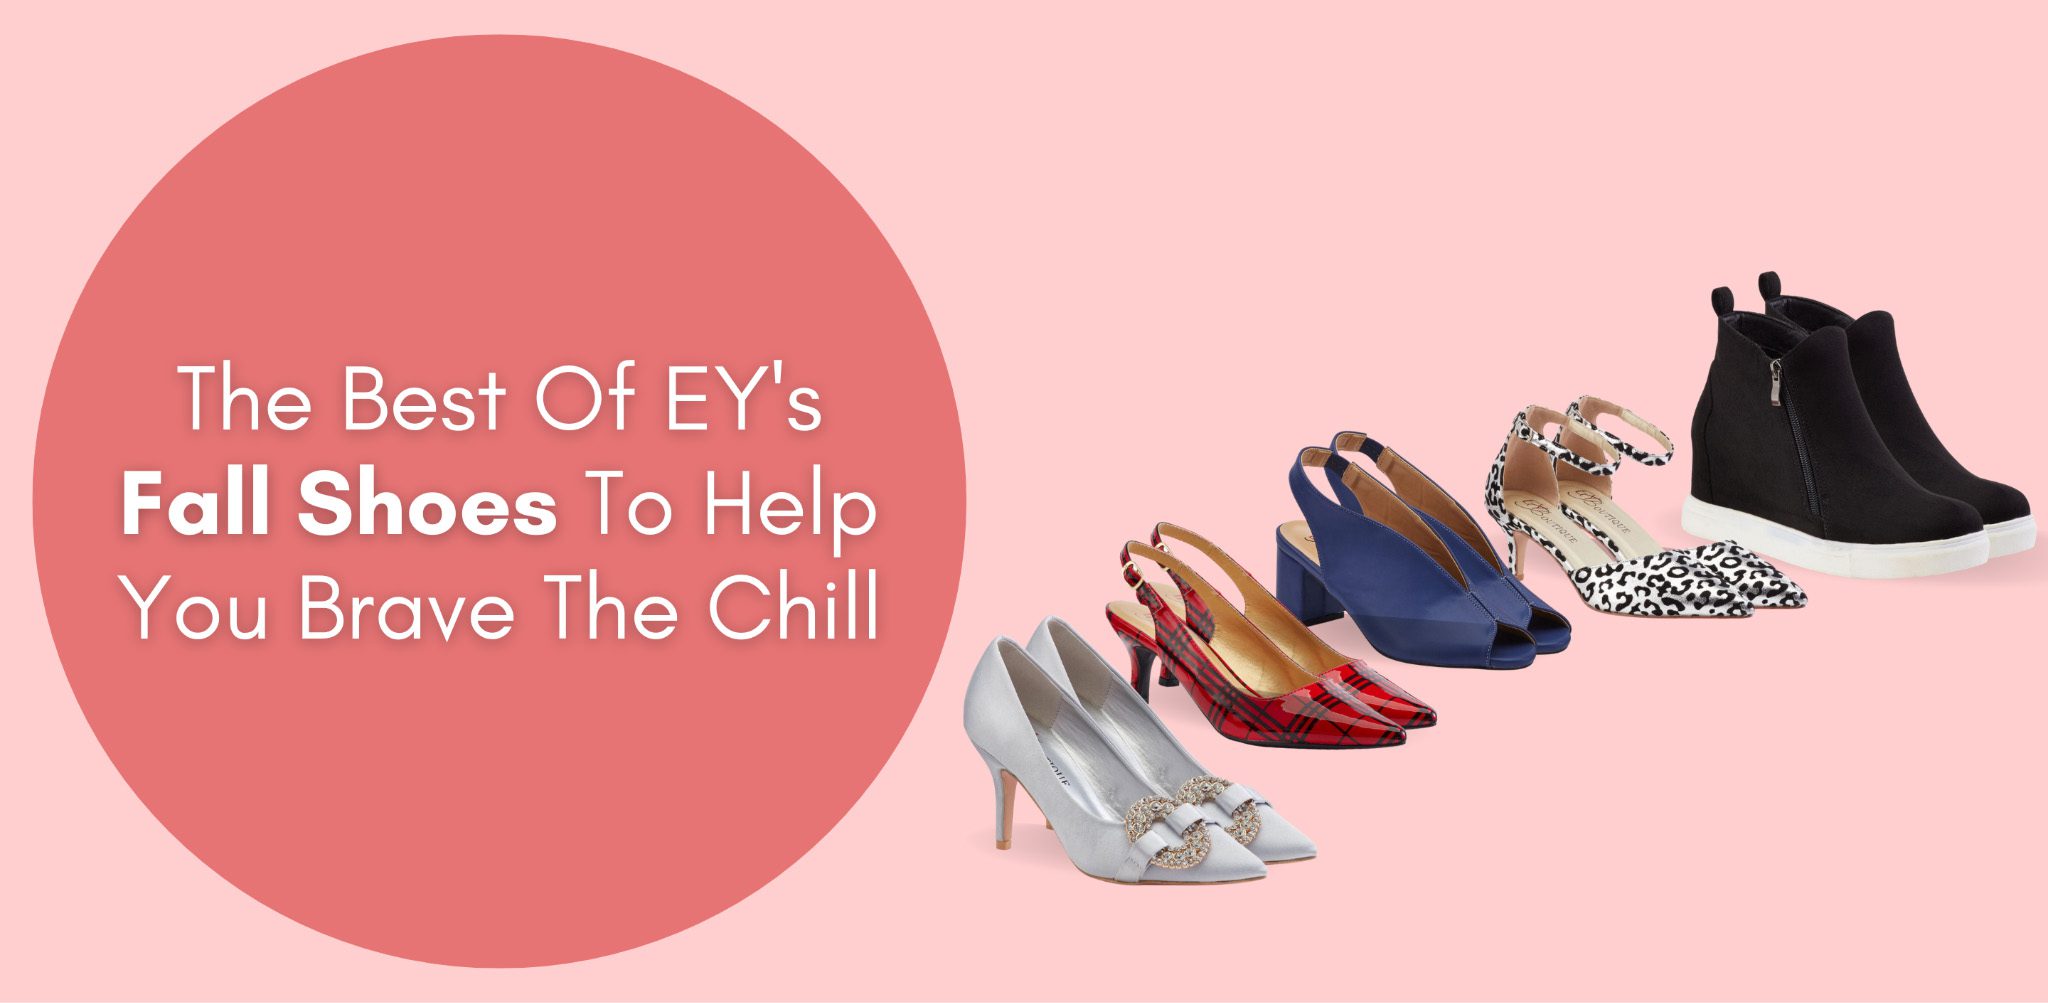 The Best Of EY’s Fall Shoes To Help You Brave The Chill